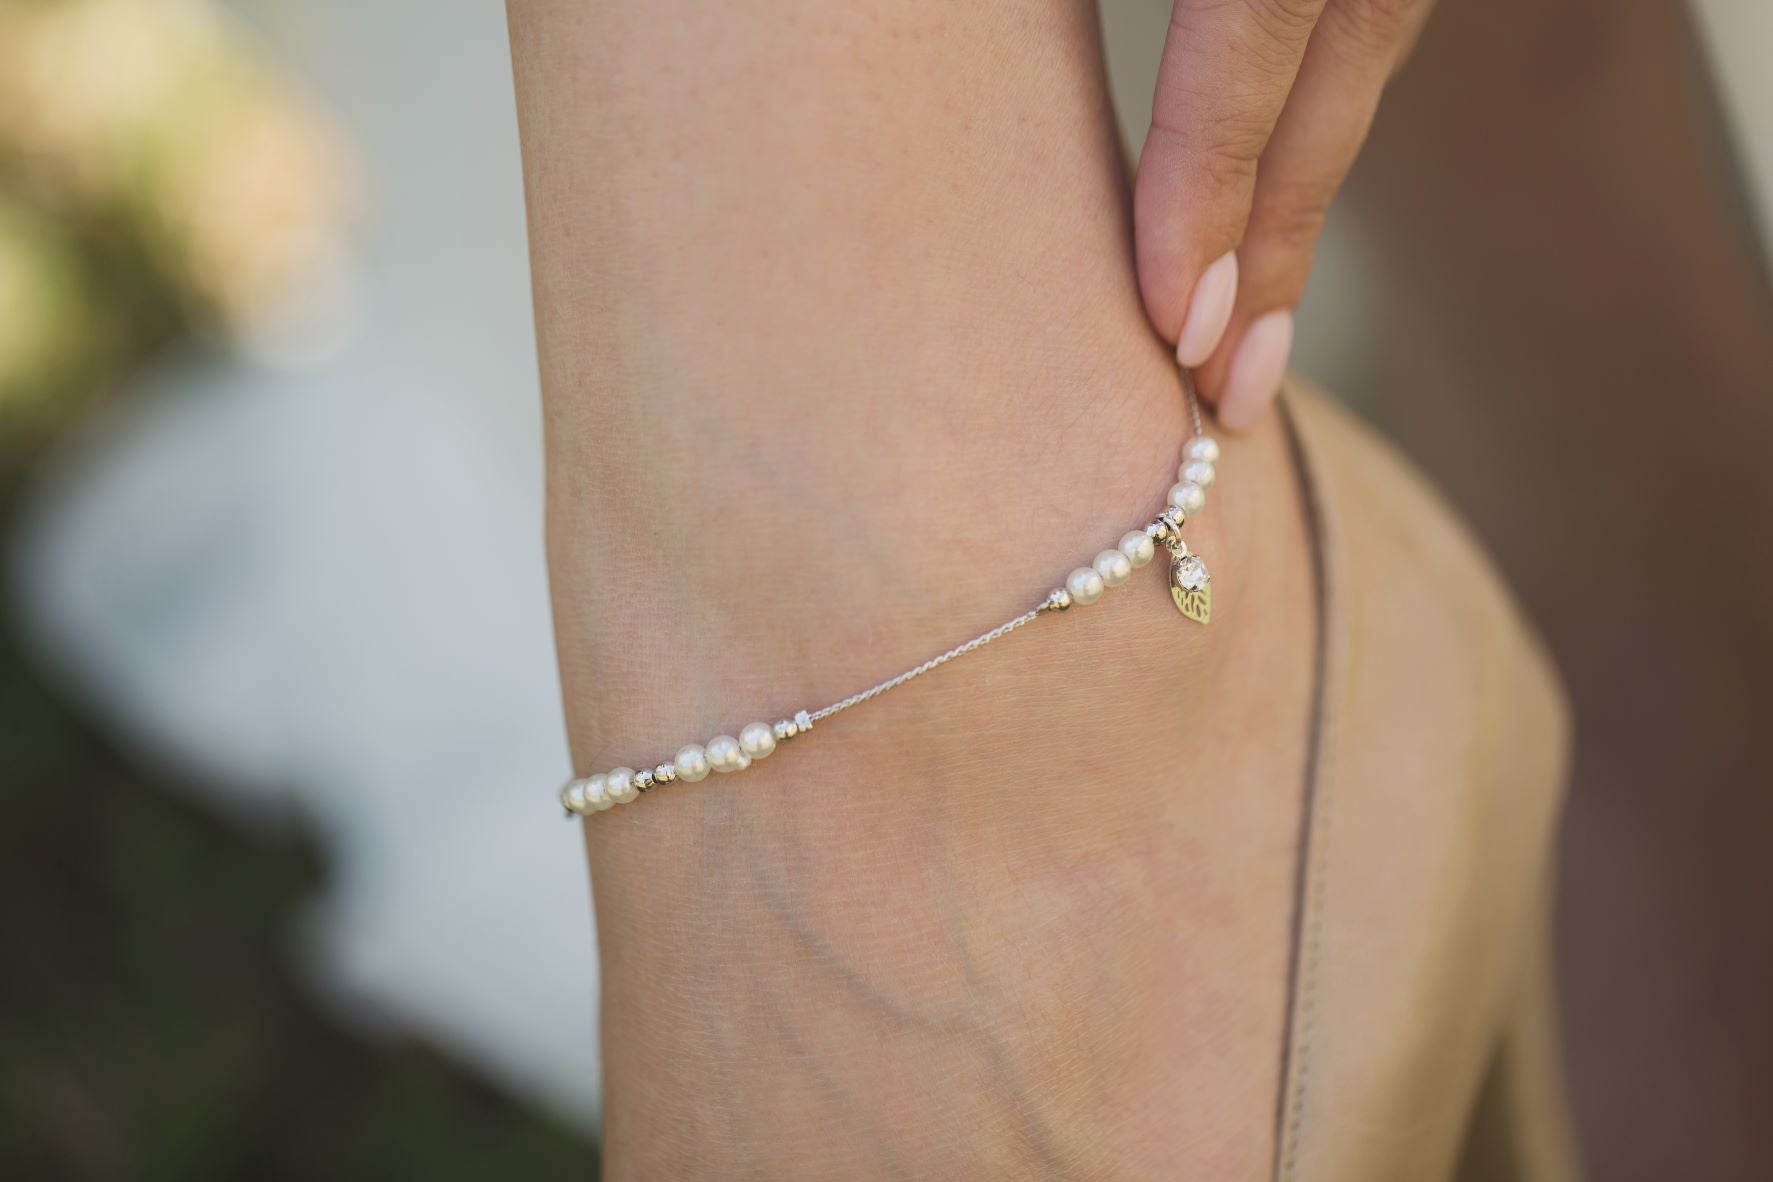 WOMEN’S ANKLETS